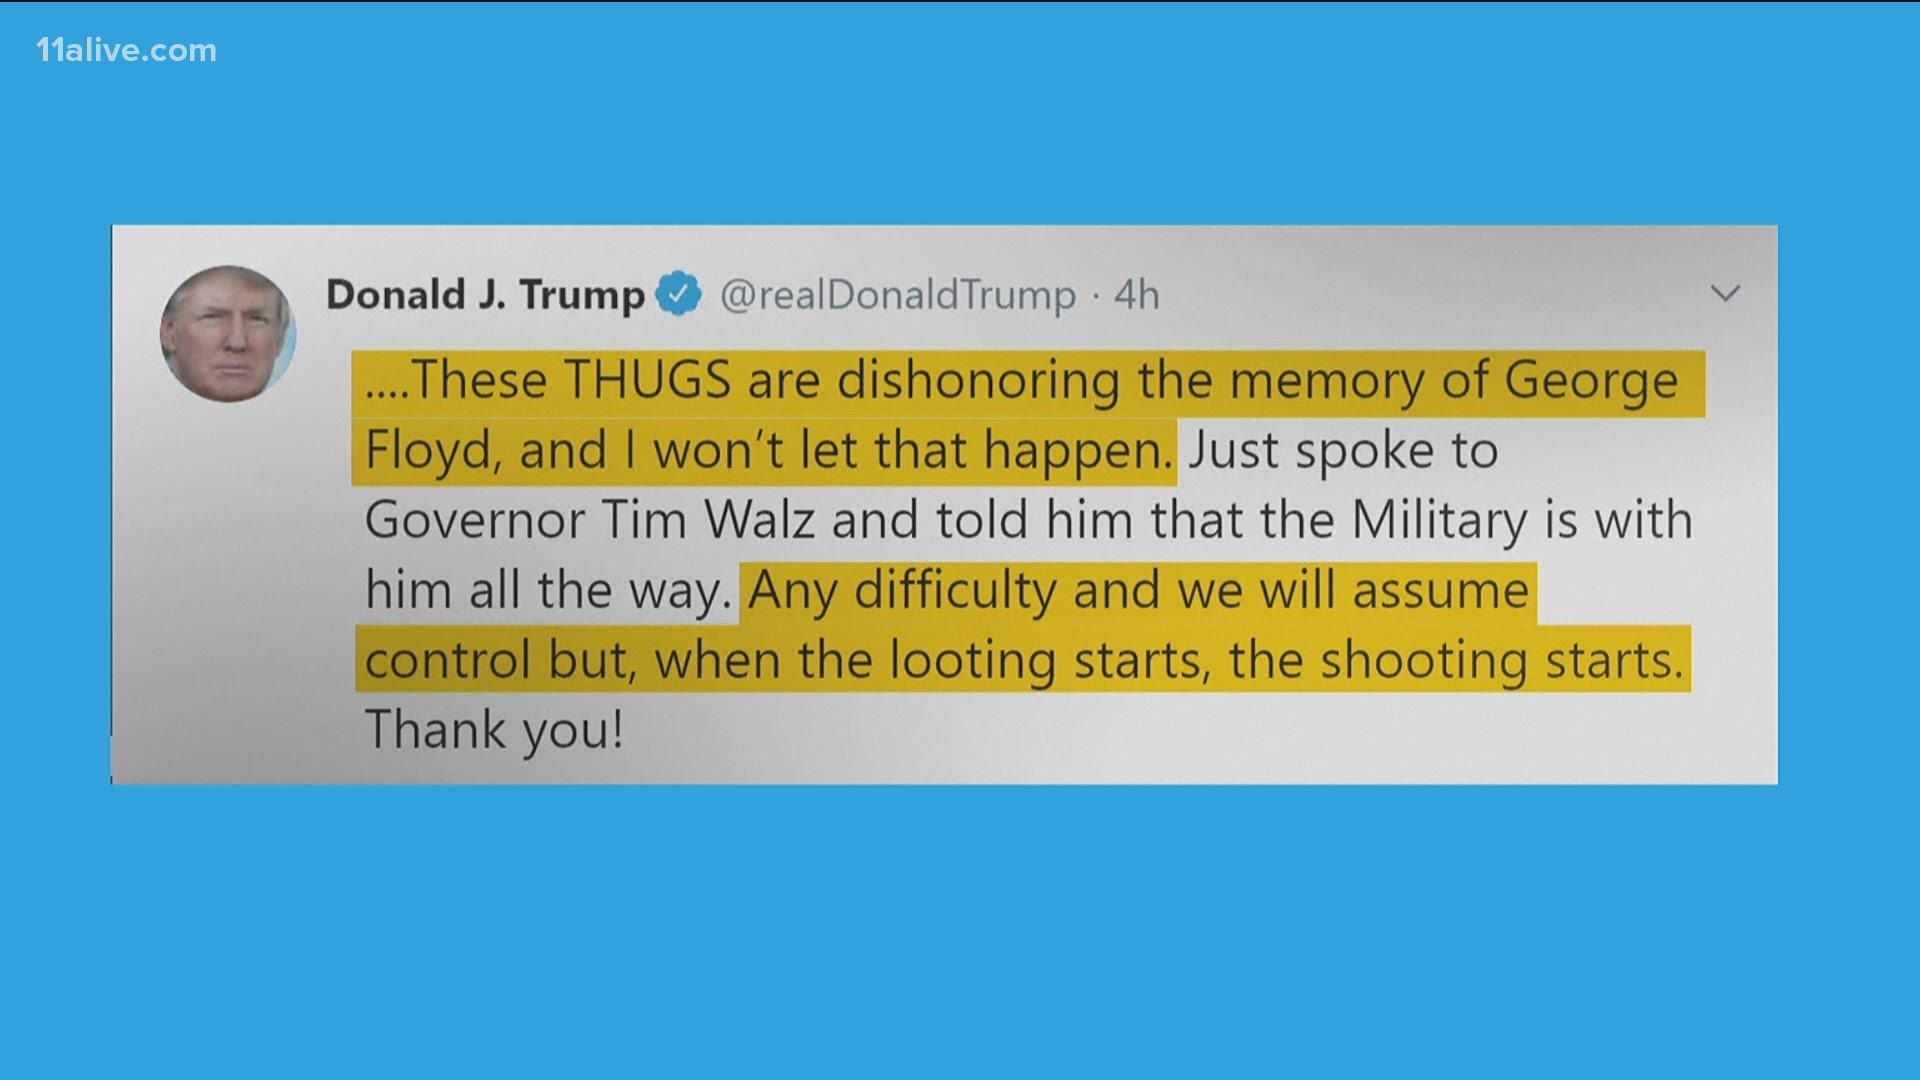 The tweet included the phrase, "when the looting starts, the shooting starts."